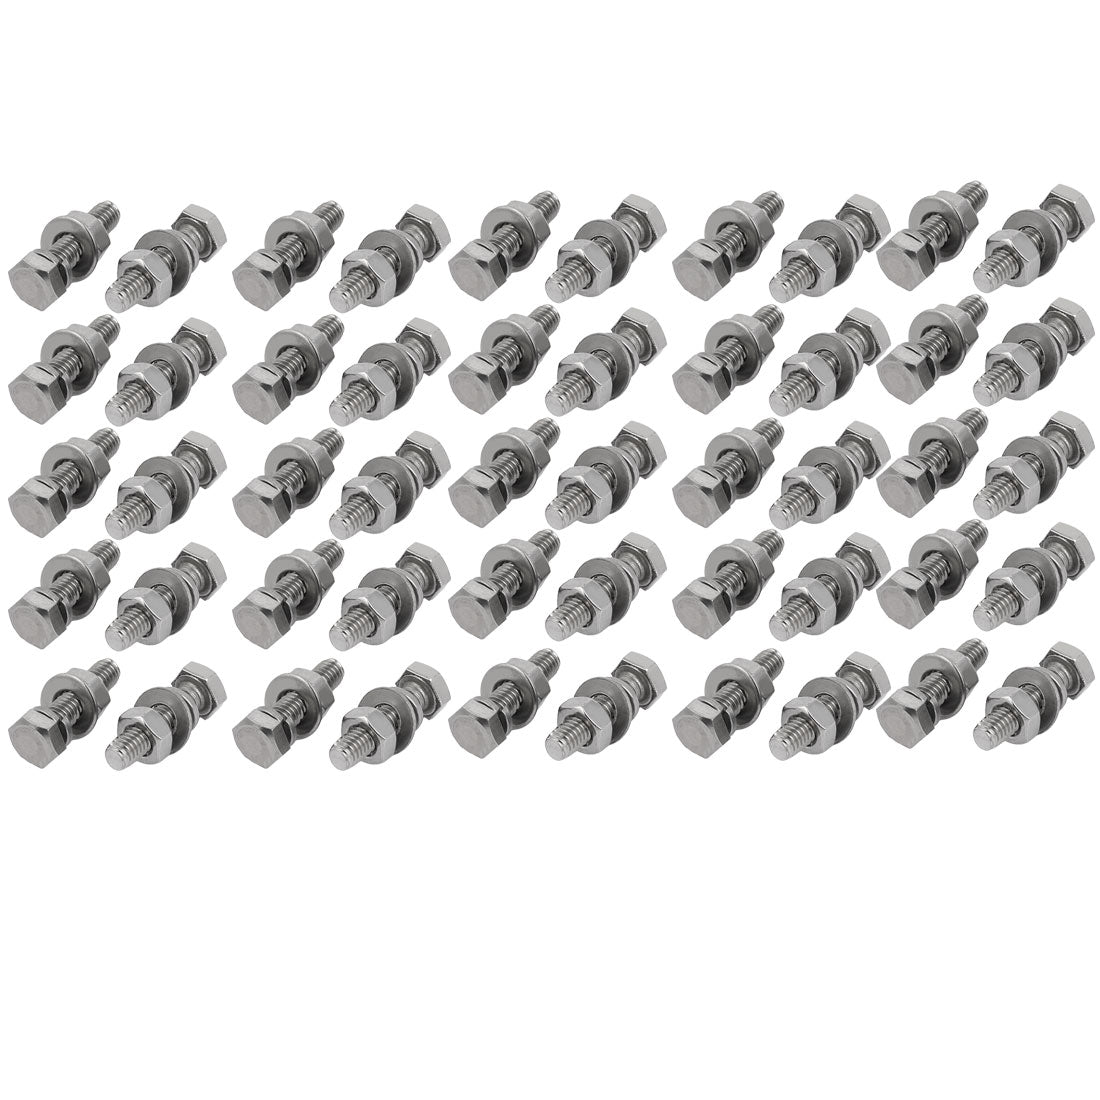 uxcell Uxcell 50pcs 304 Stainless Steel M4x16mm Hex Bolts w Nuts and Washers Assortment Kit